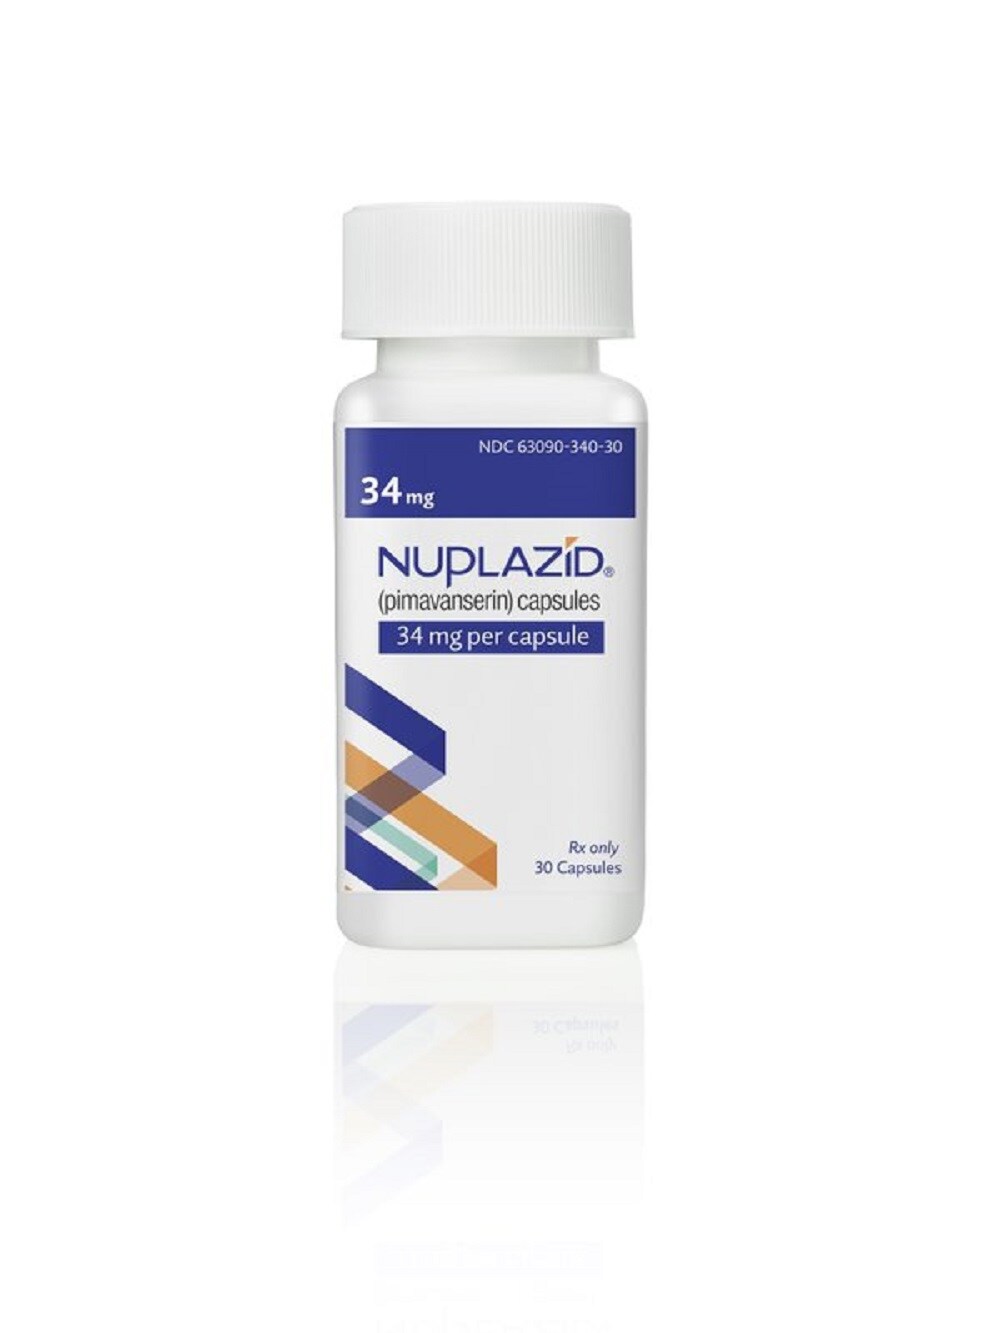 A bottle of Nuplazid from Acadia Pharmaceuticals Inc. that can treat psychosis related to dementia. Image credit: AP